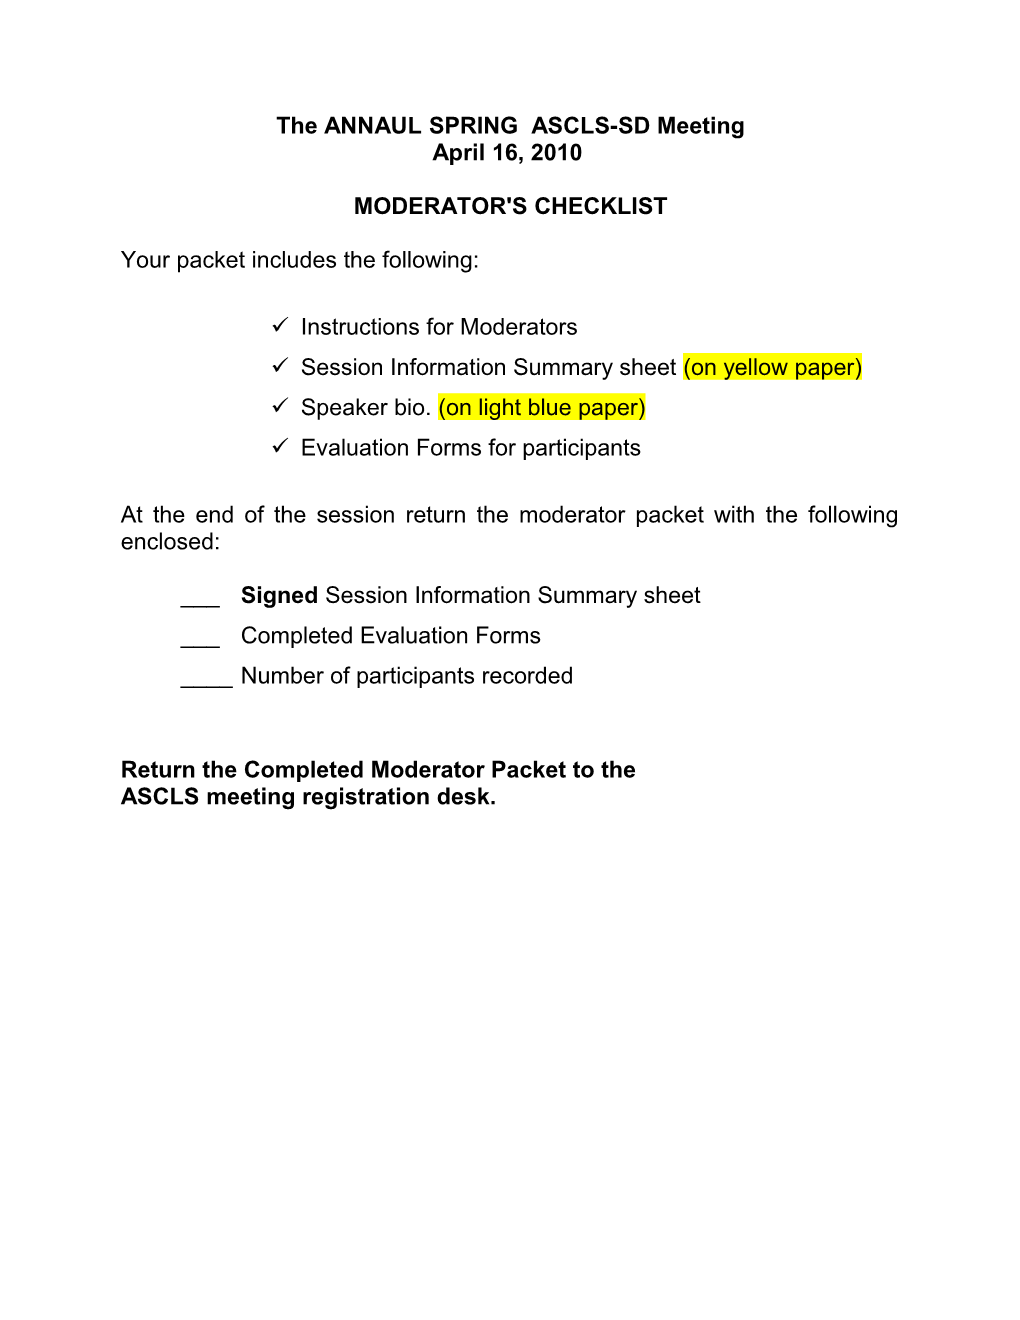 Instructions for Moderators